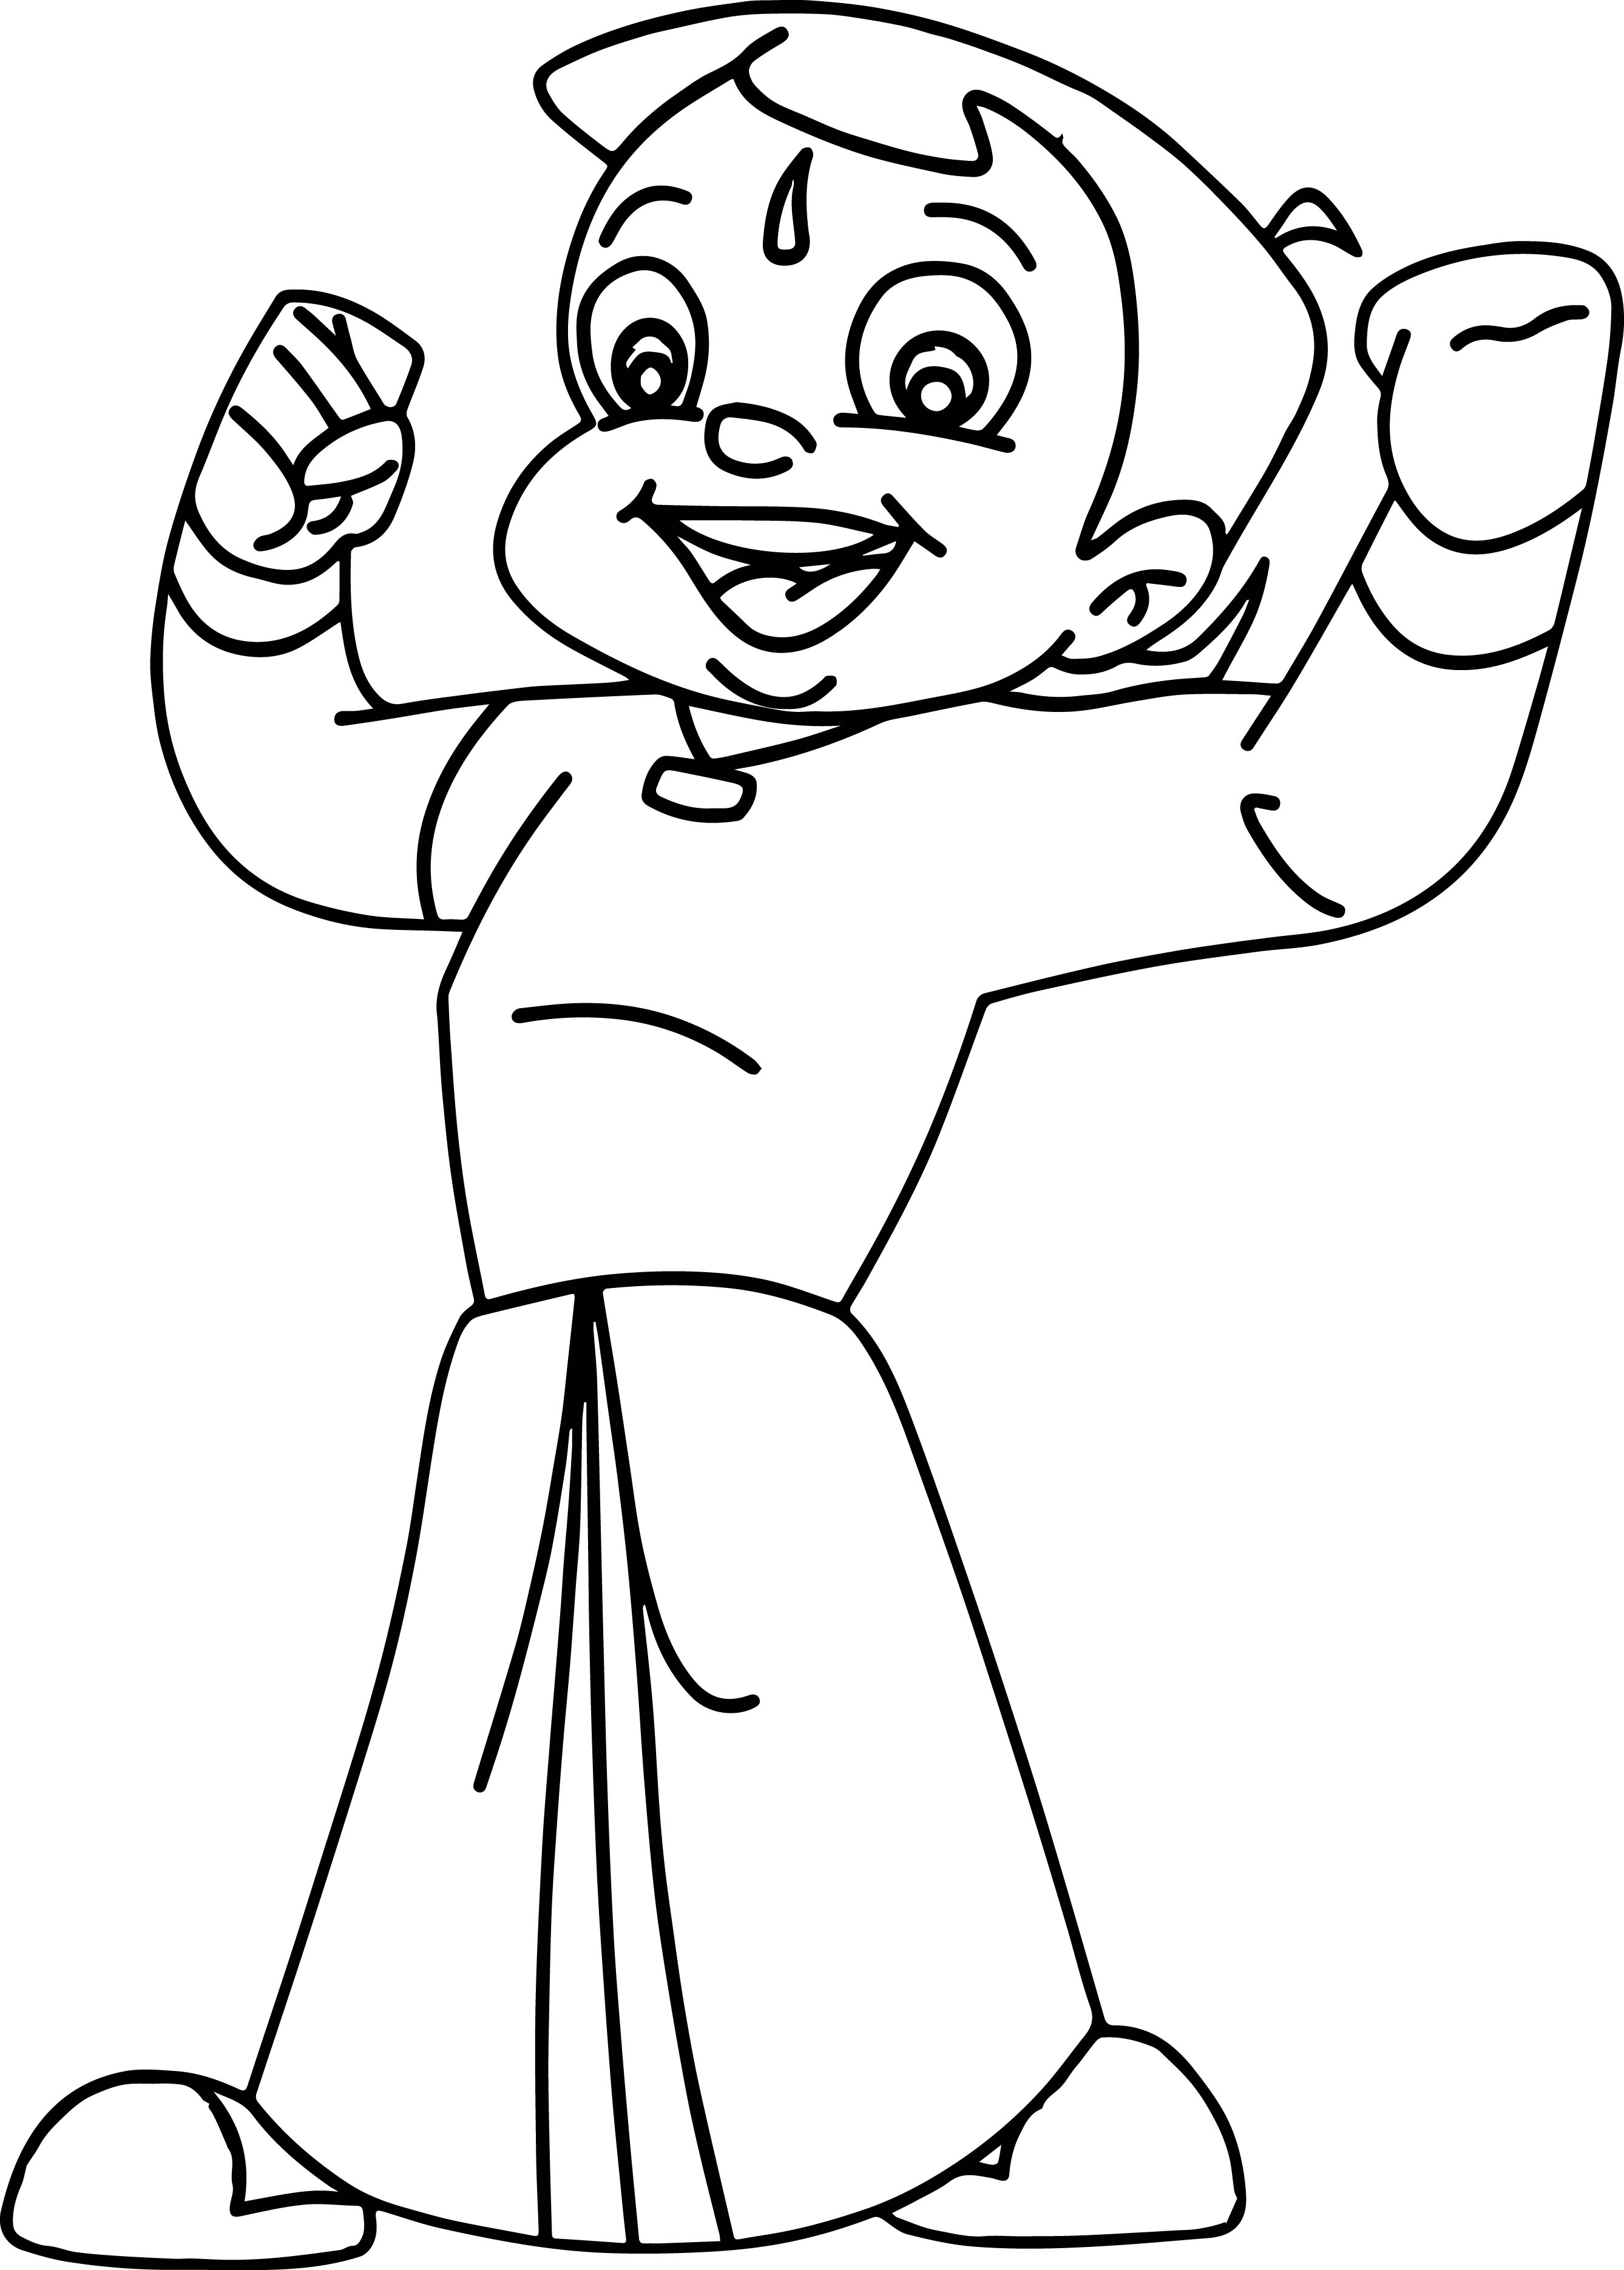 Chota Bheem Coloring Pages For Kids